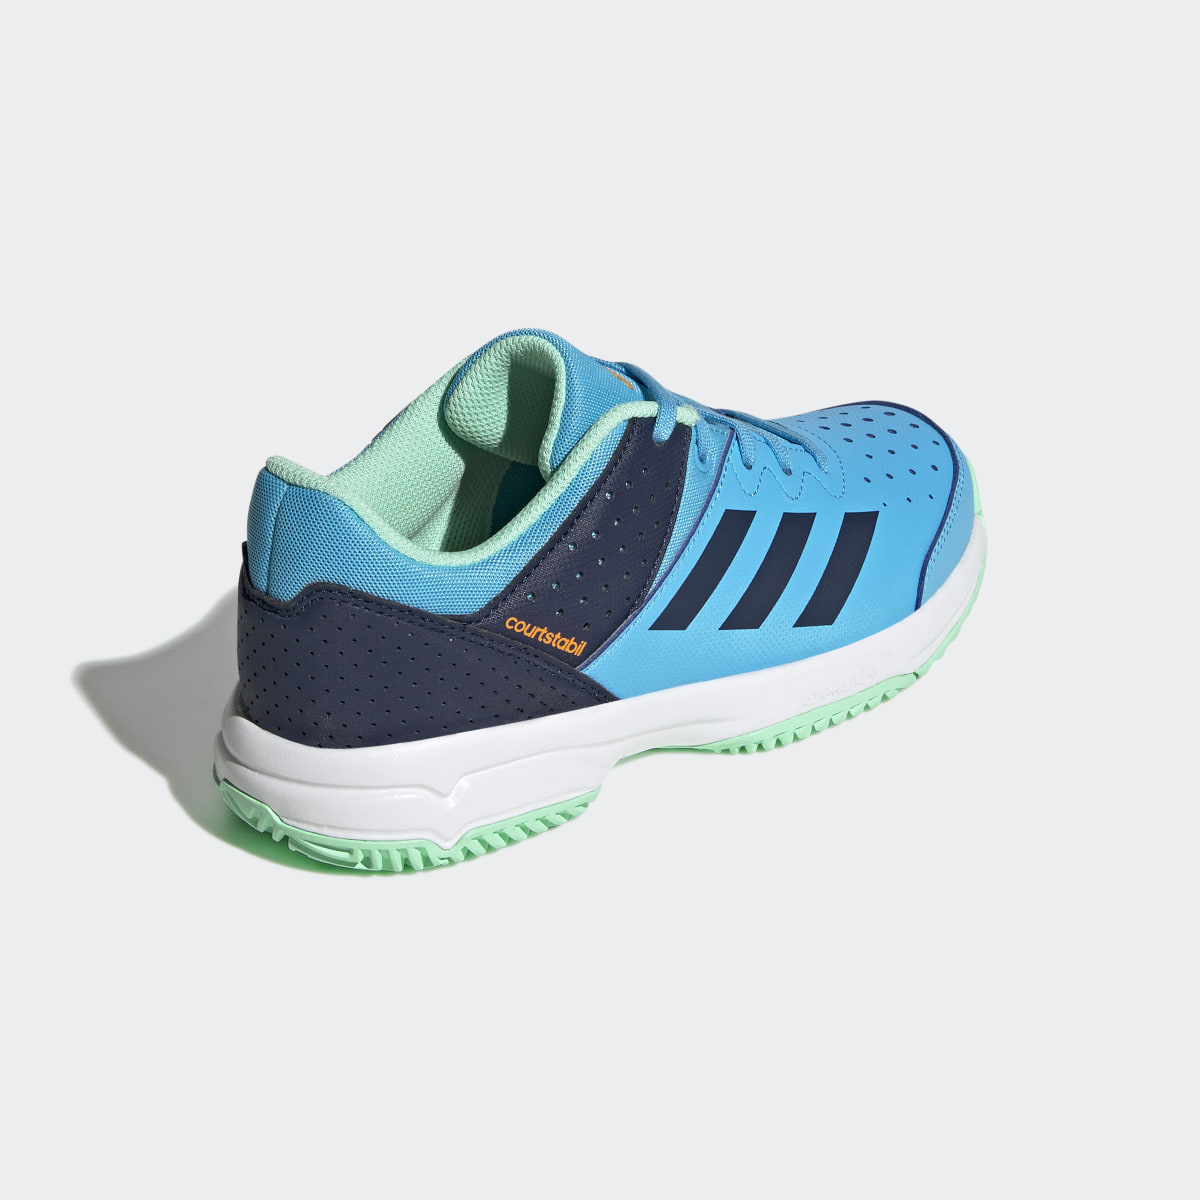 Adidas Court Stabil Shoes. 6